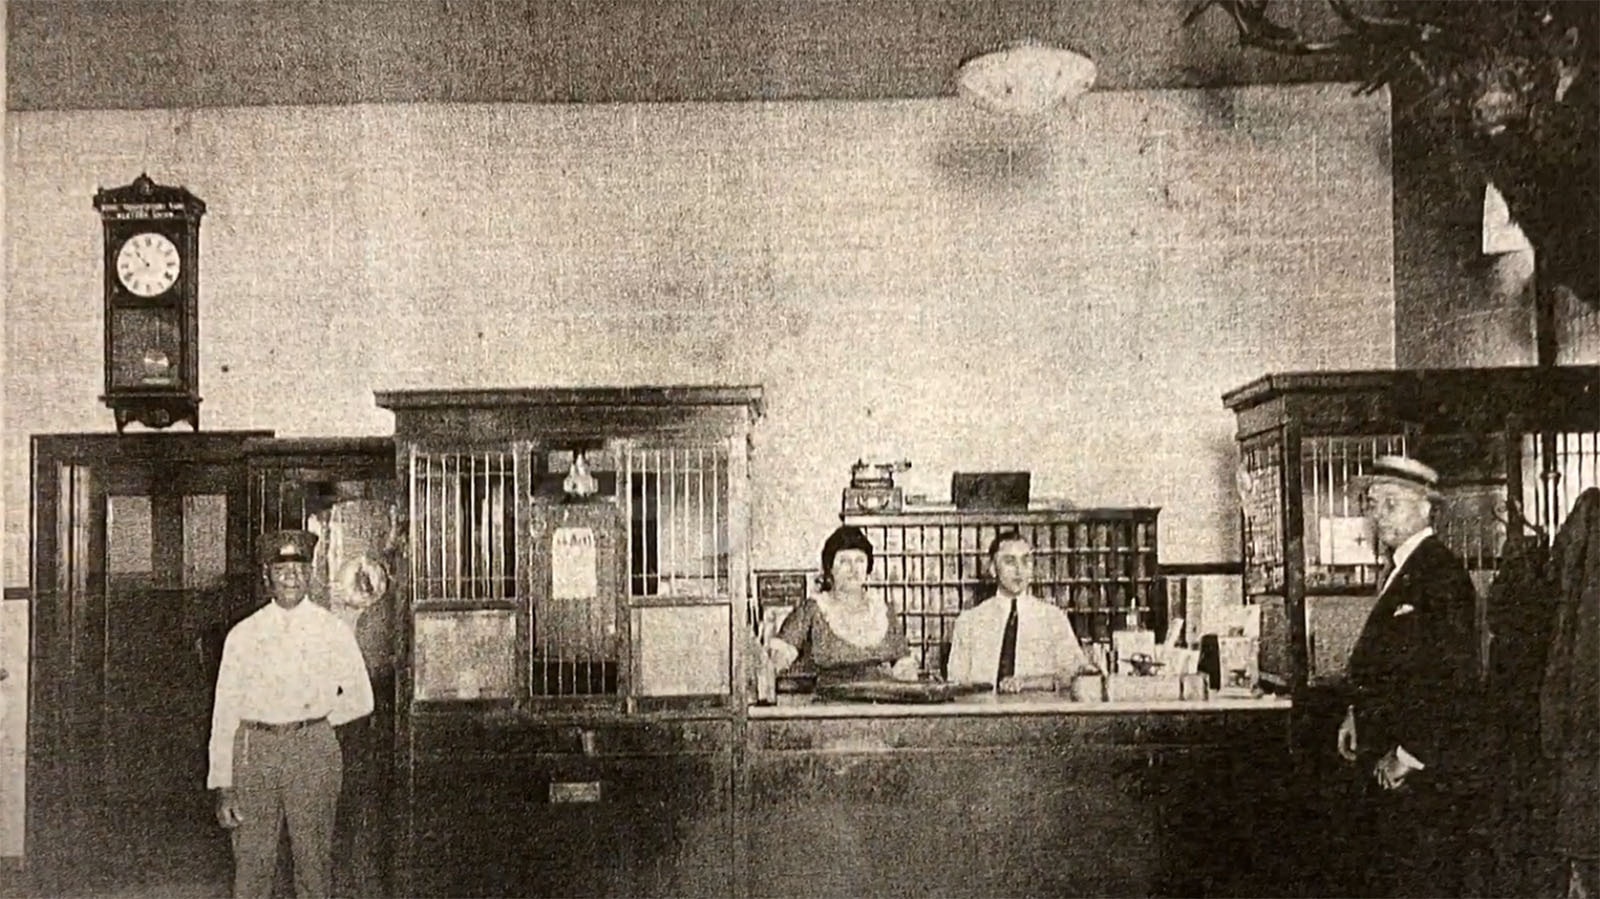 The lobby of the Emery Hotel in 1926.